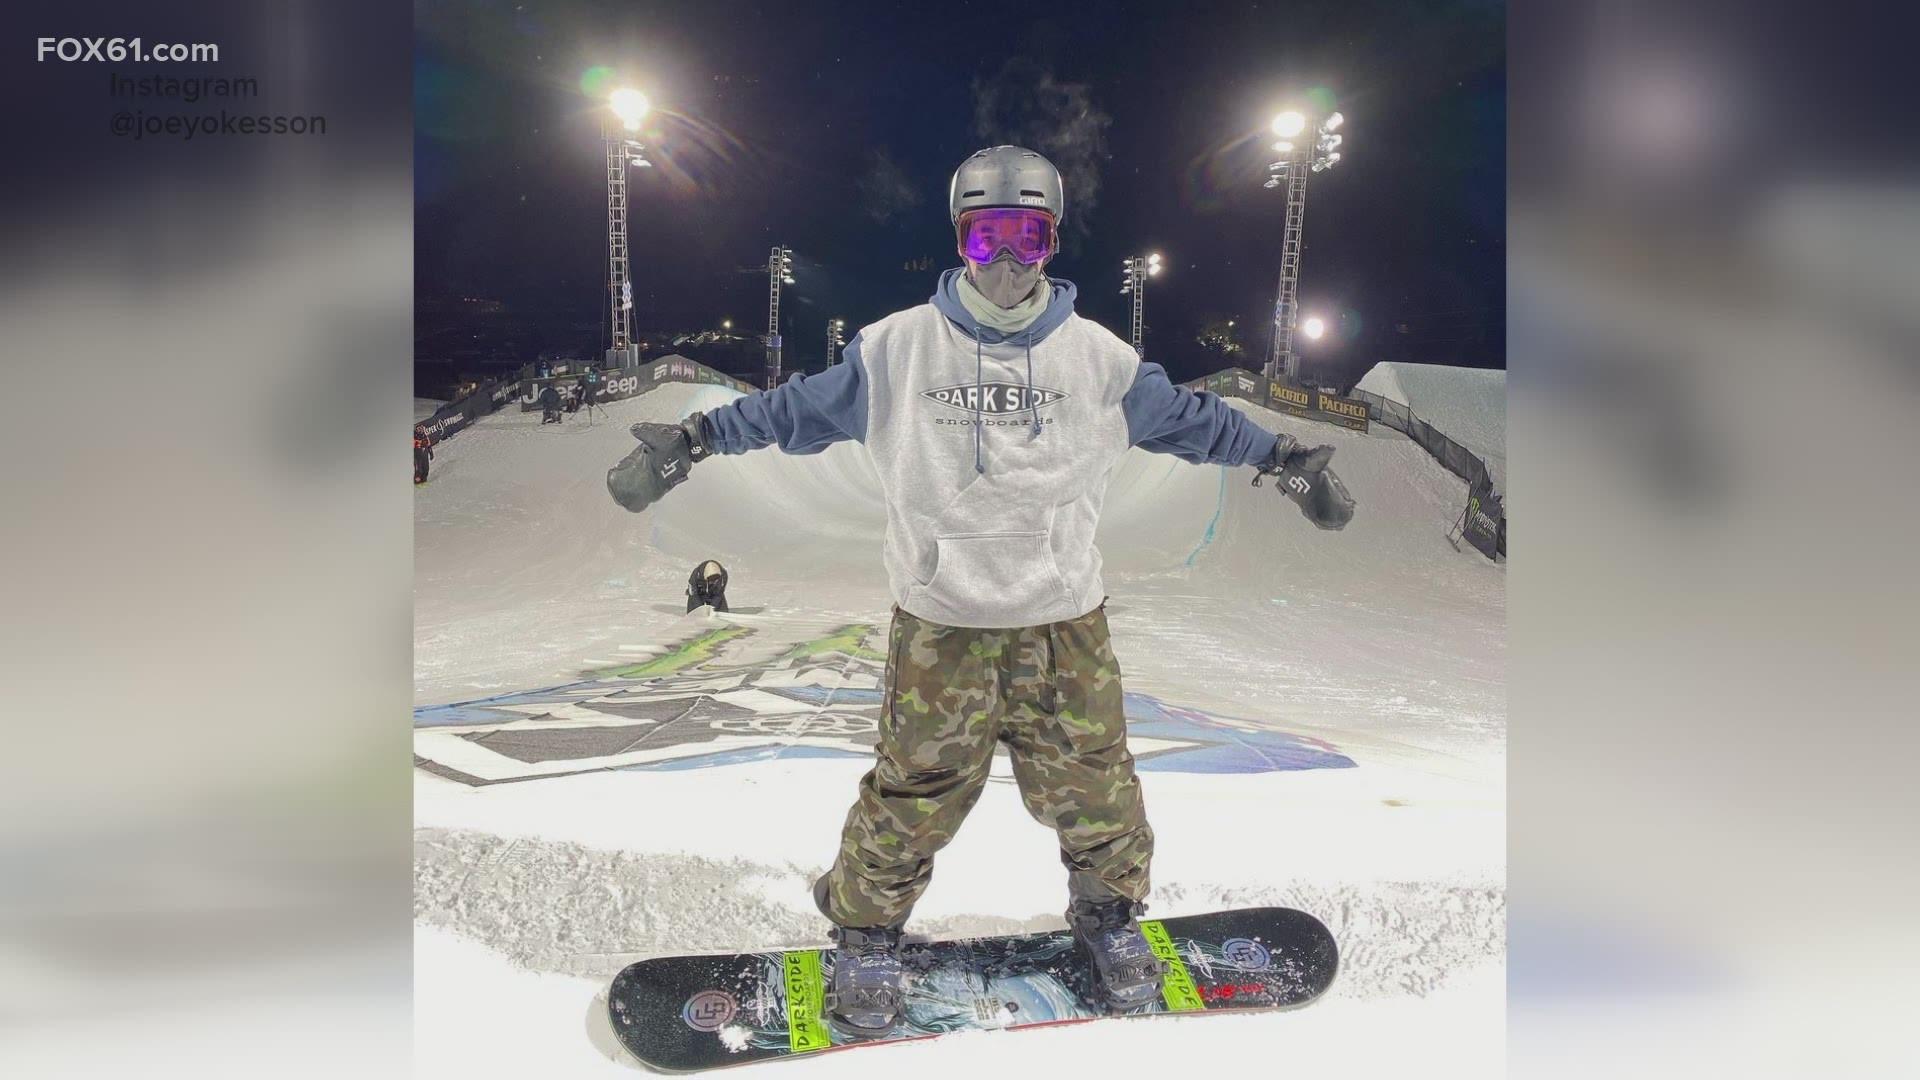 If you snowboard, watching the X Games is must see TV. Well, there is a young man from Southbury, who just competed!